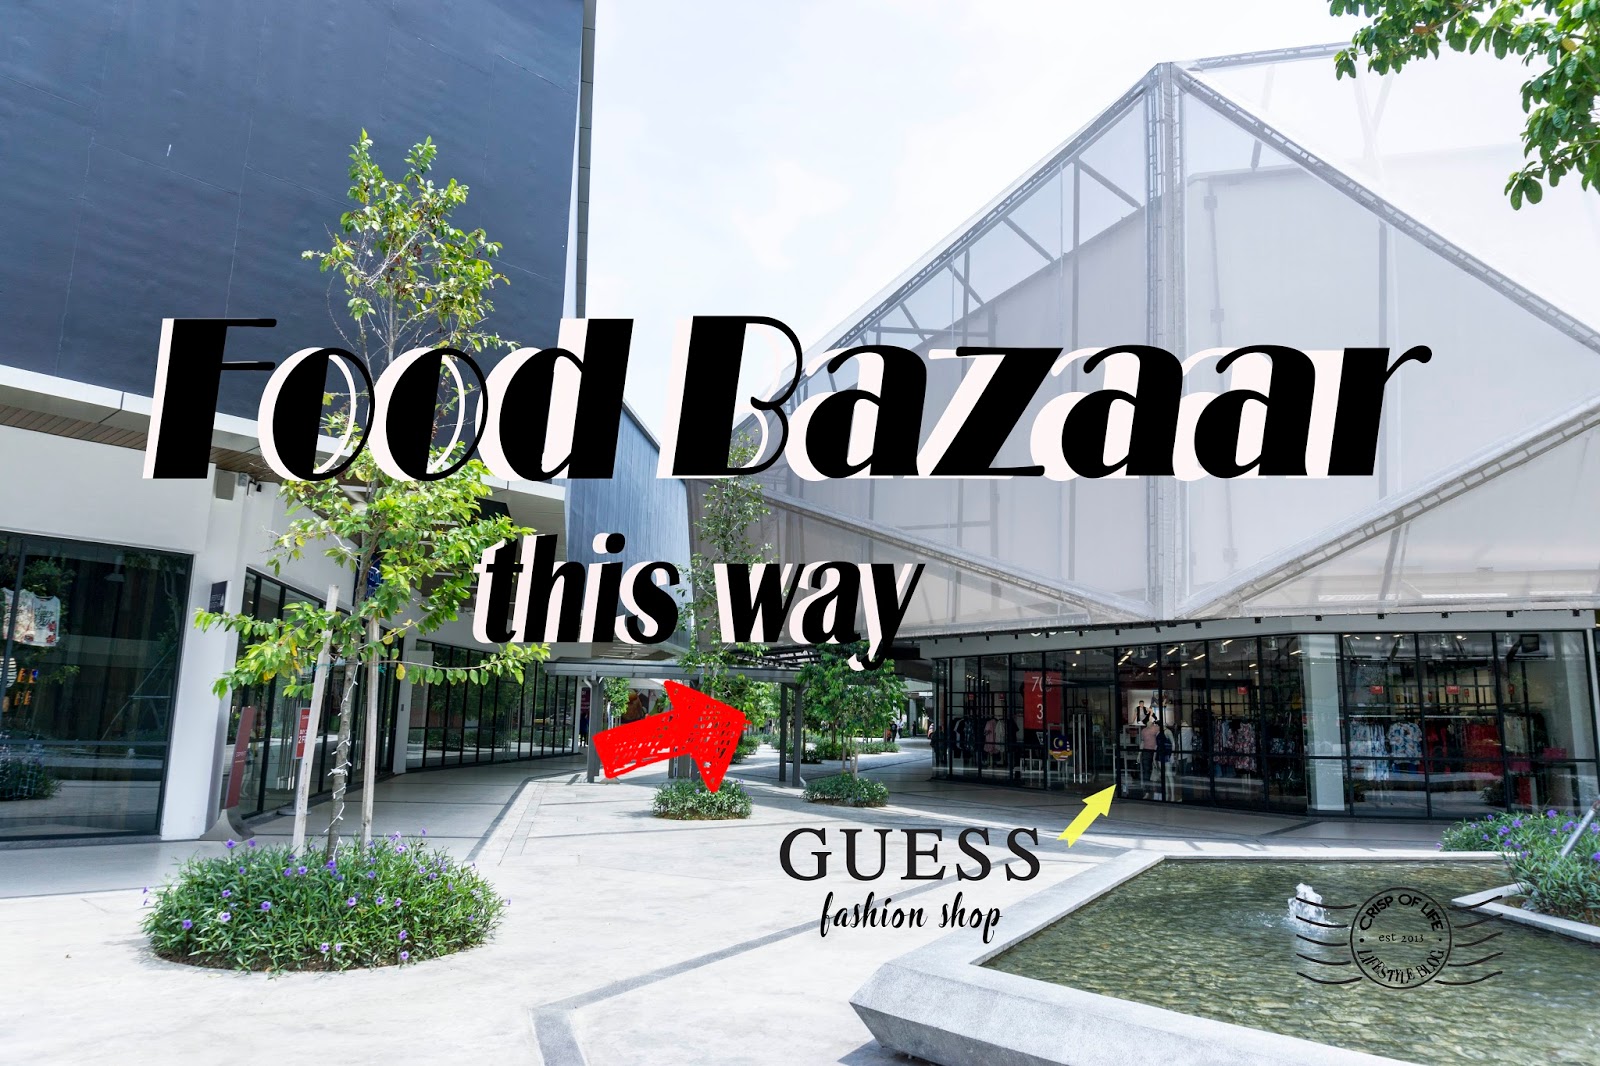 Food Bazaar Newly Launched @ Design Village Penang's Outlet Mall